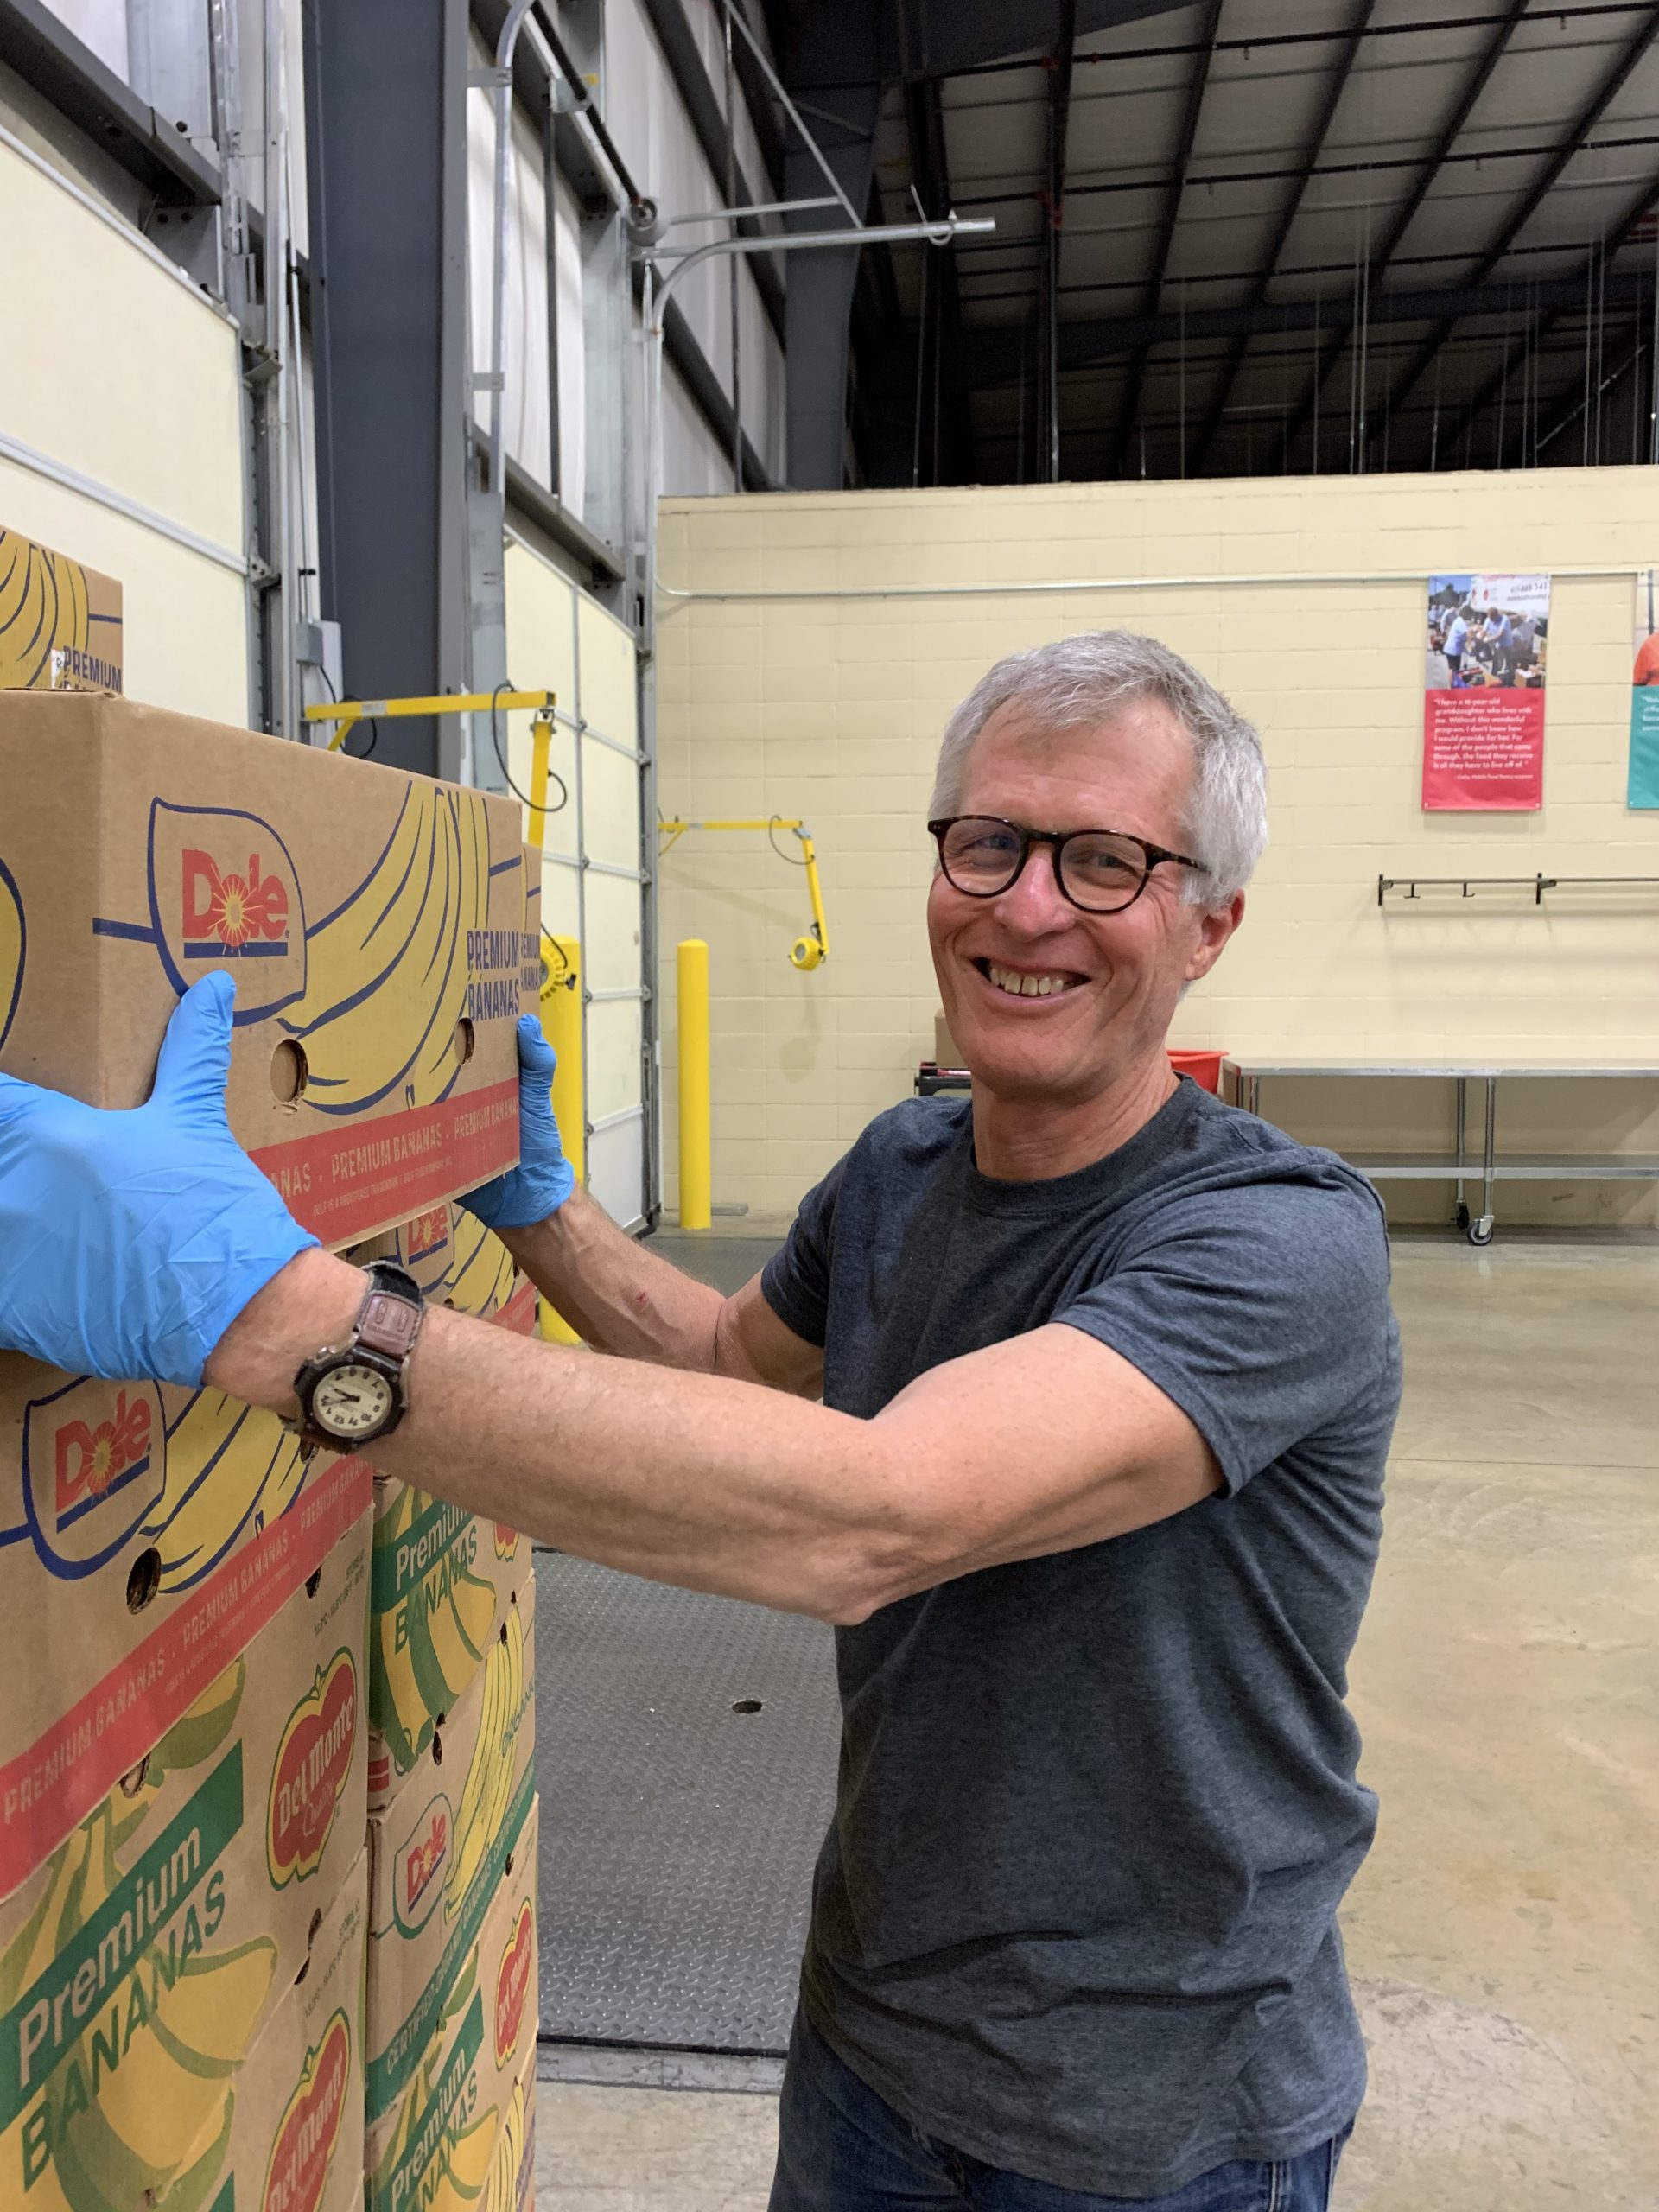 Temporary employee takes on full-time role at The Food Bank